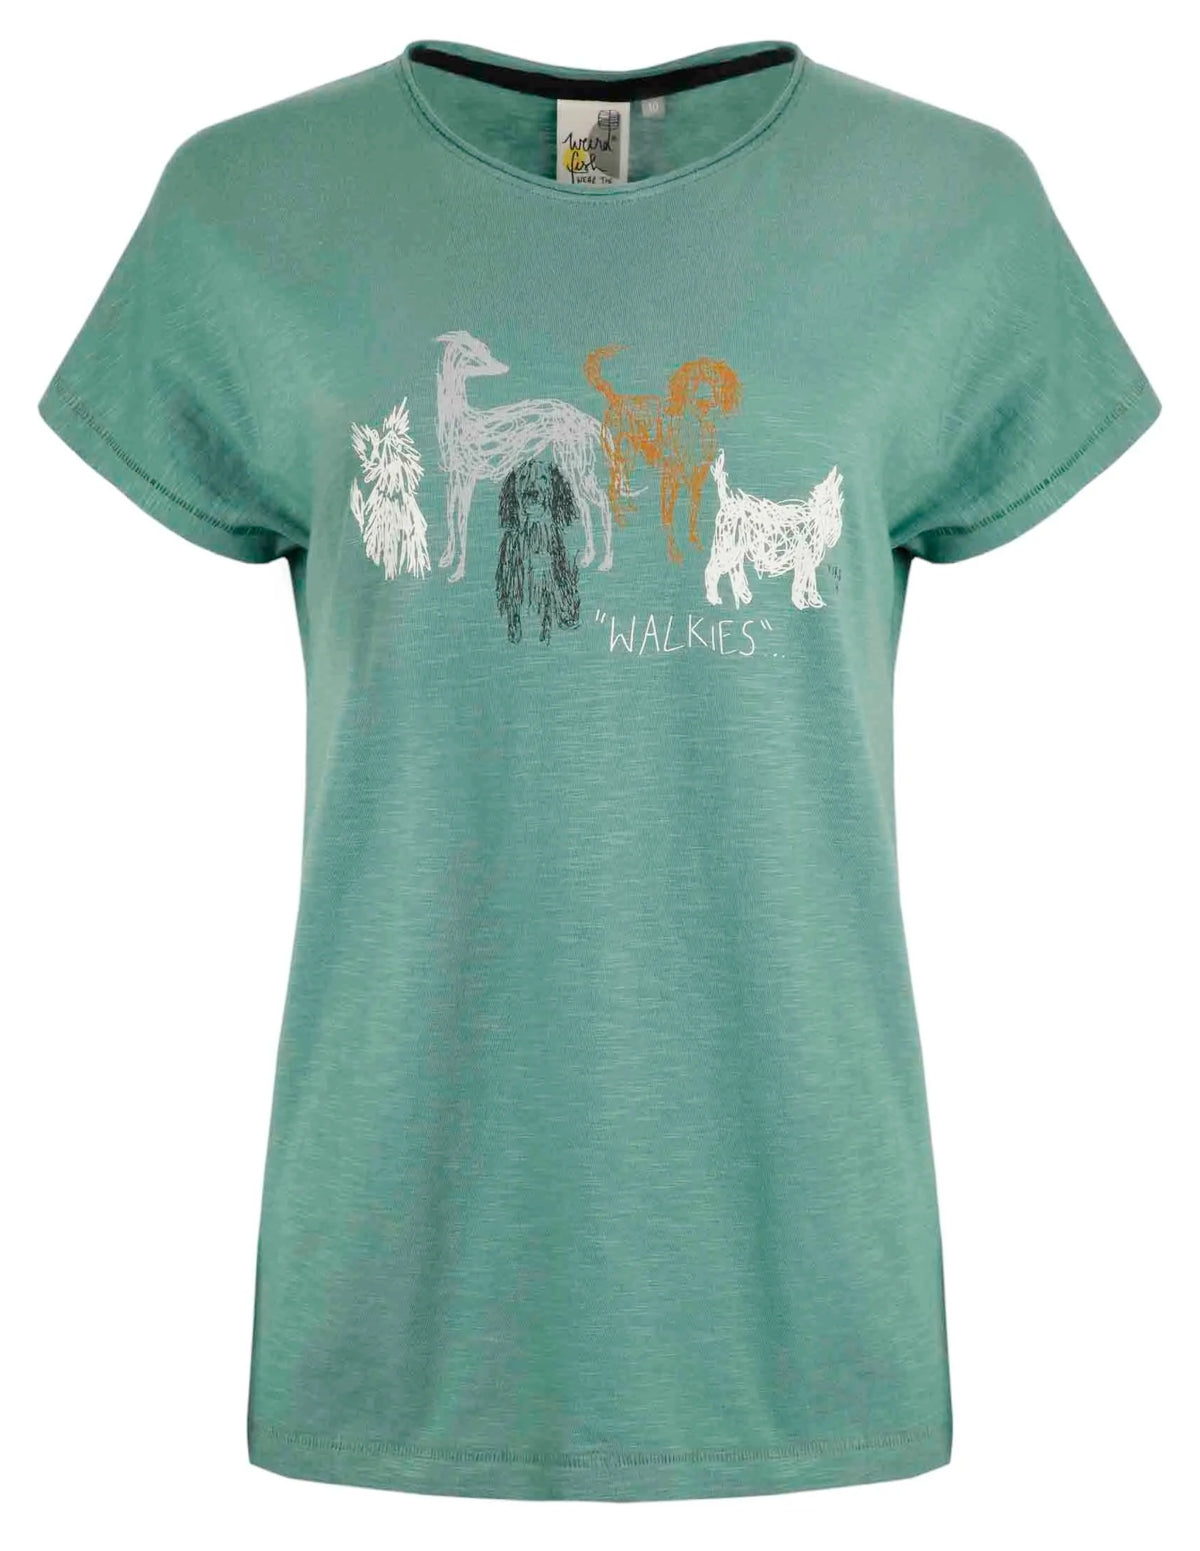 A Weird Fish women's Walkies short sleeve t-shirt featuring a sketch style dog print on the front, in an organic cotton slub fabric in dark jade green.